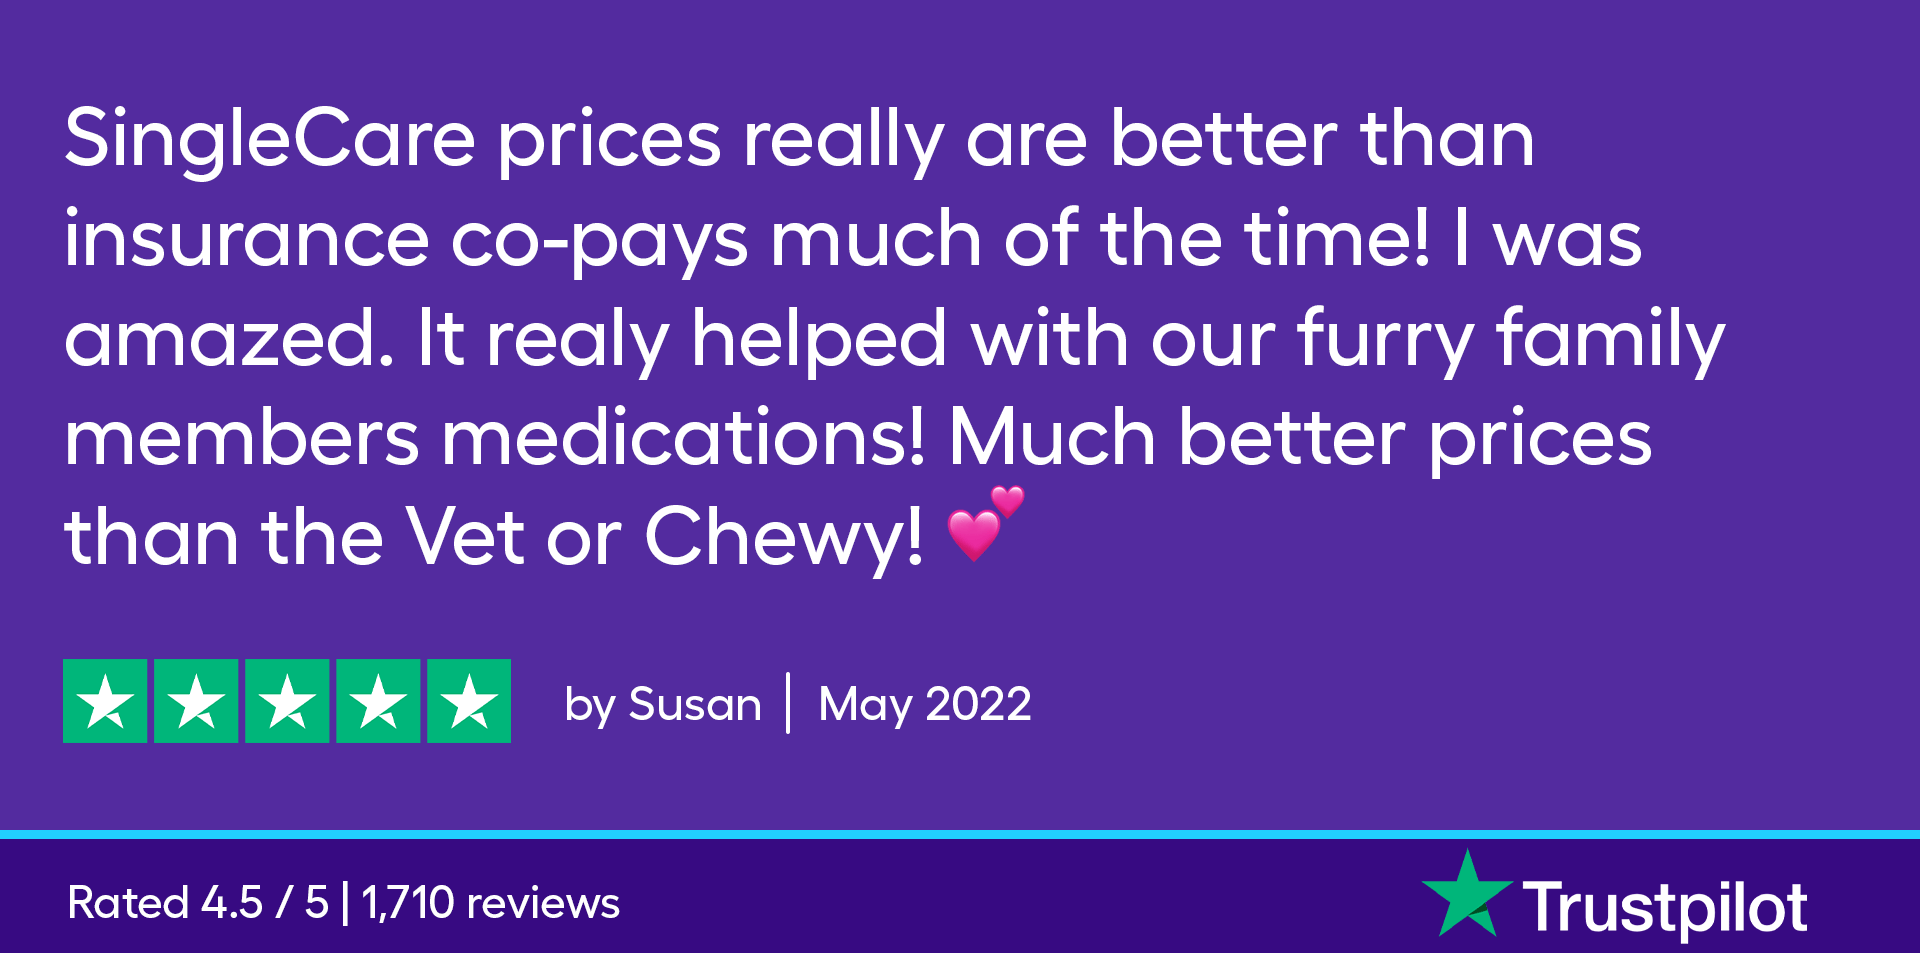 SingleCare prices really are better than insurance co-pays much of the time! I was amazed. It really helped with our furry family members medications! Much better prices than the Vet of Chewy!